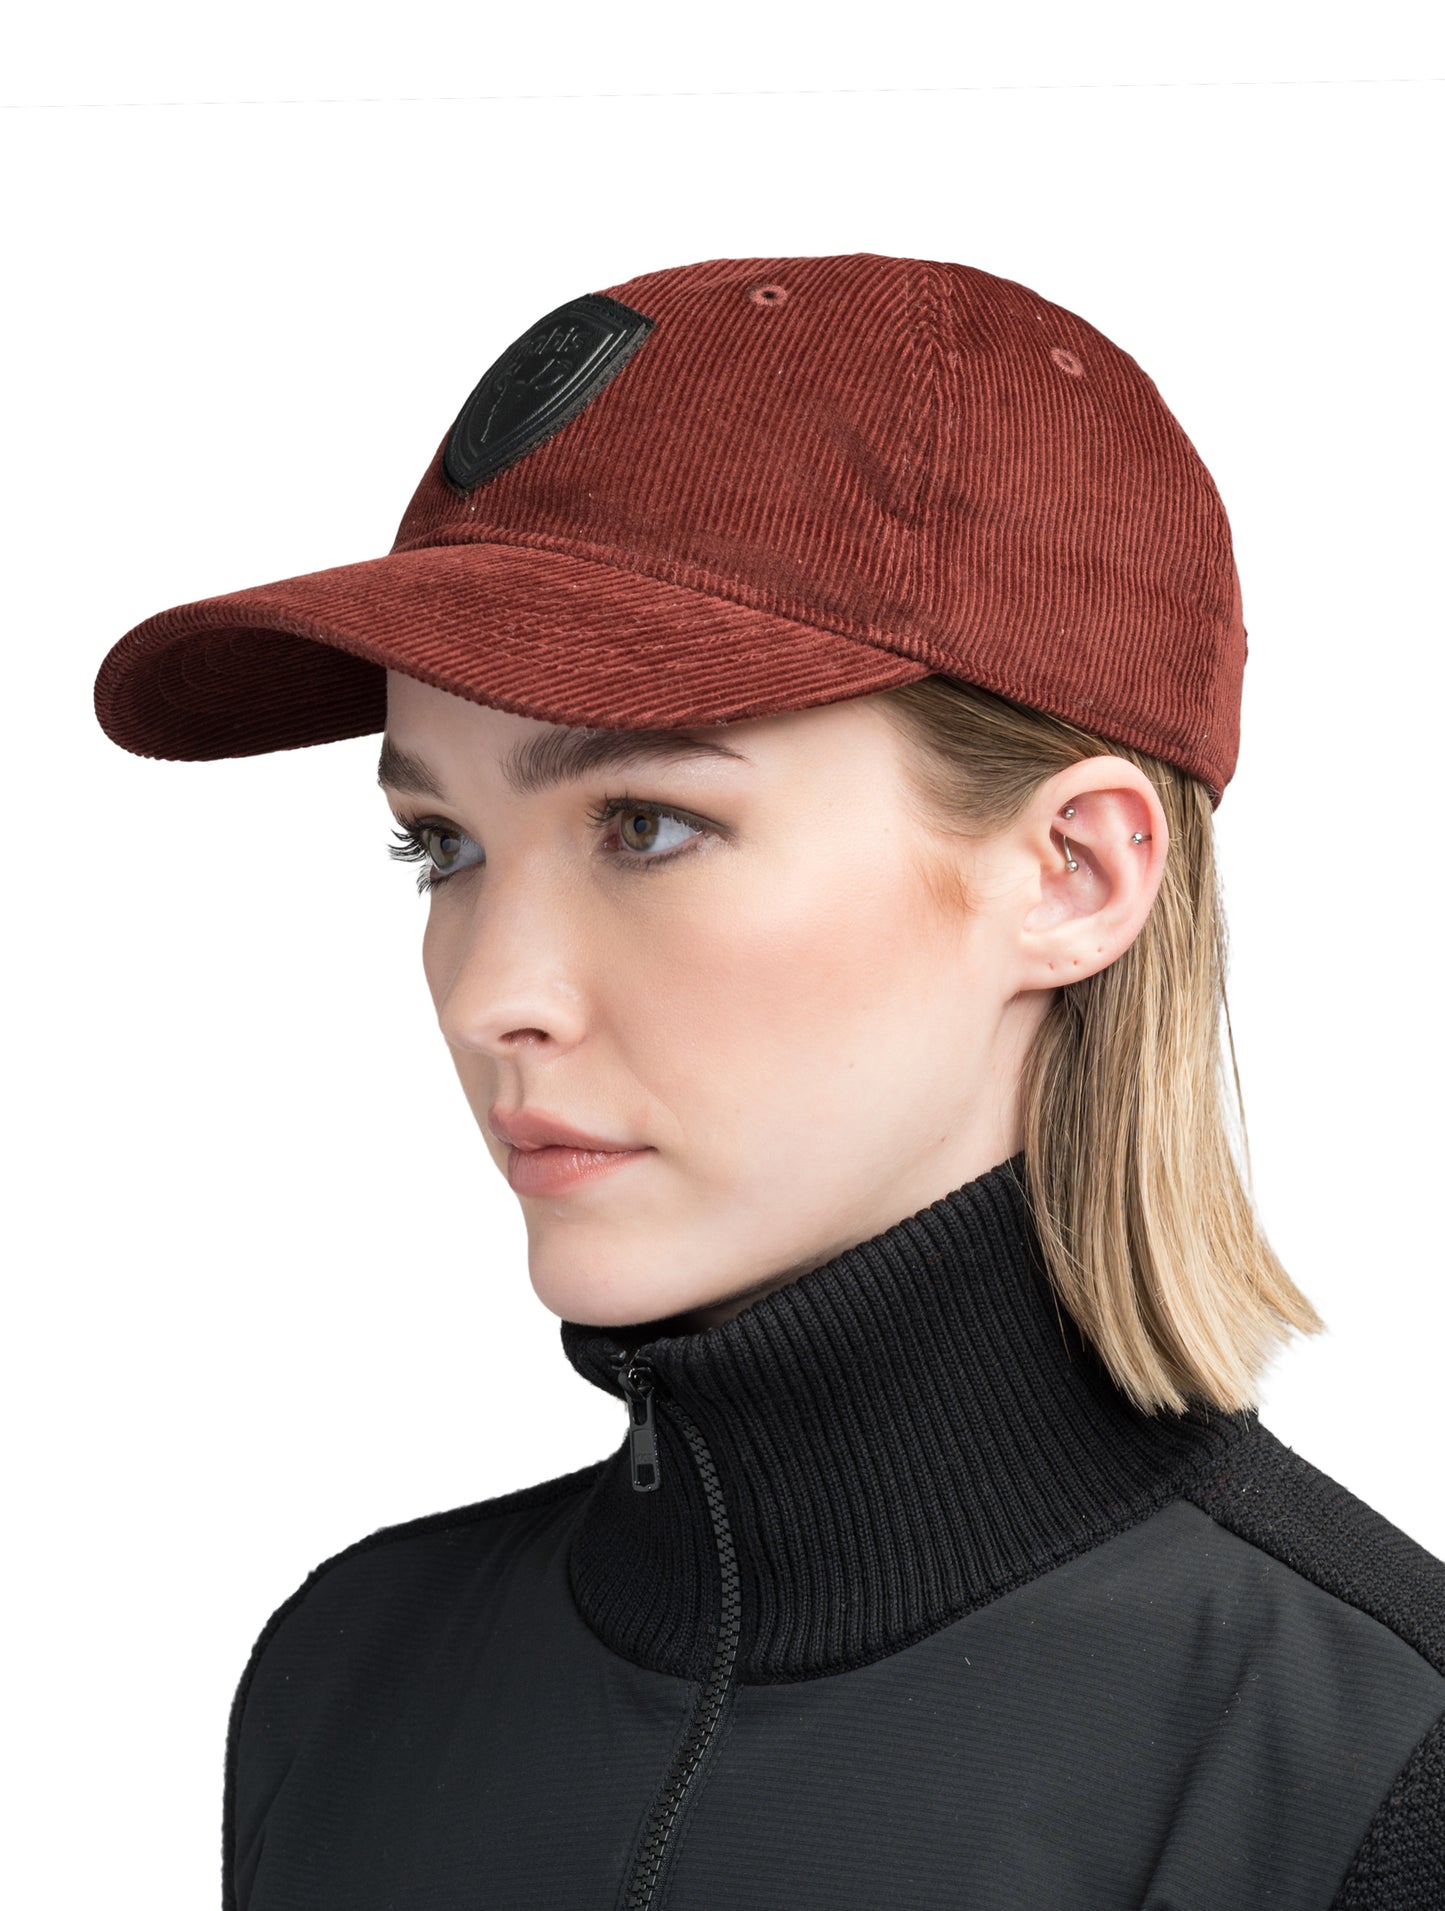 Carter Unisex Tailored Ball Cap in 100% cotton corduroy, unstructured crown, curved brim, and leather strap back with metal buckle closure, in Rio Red